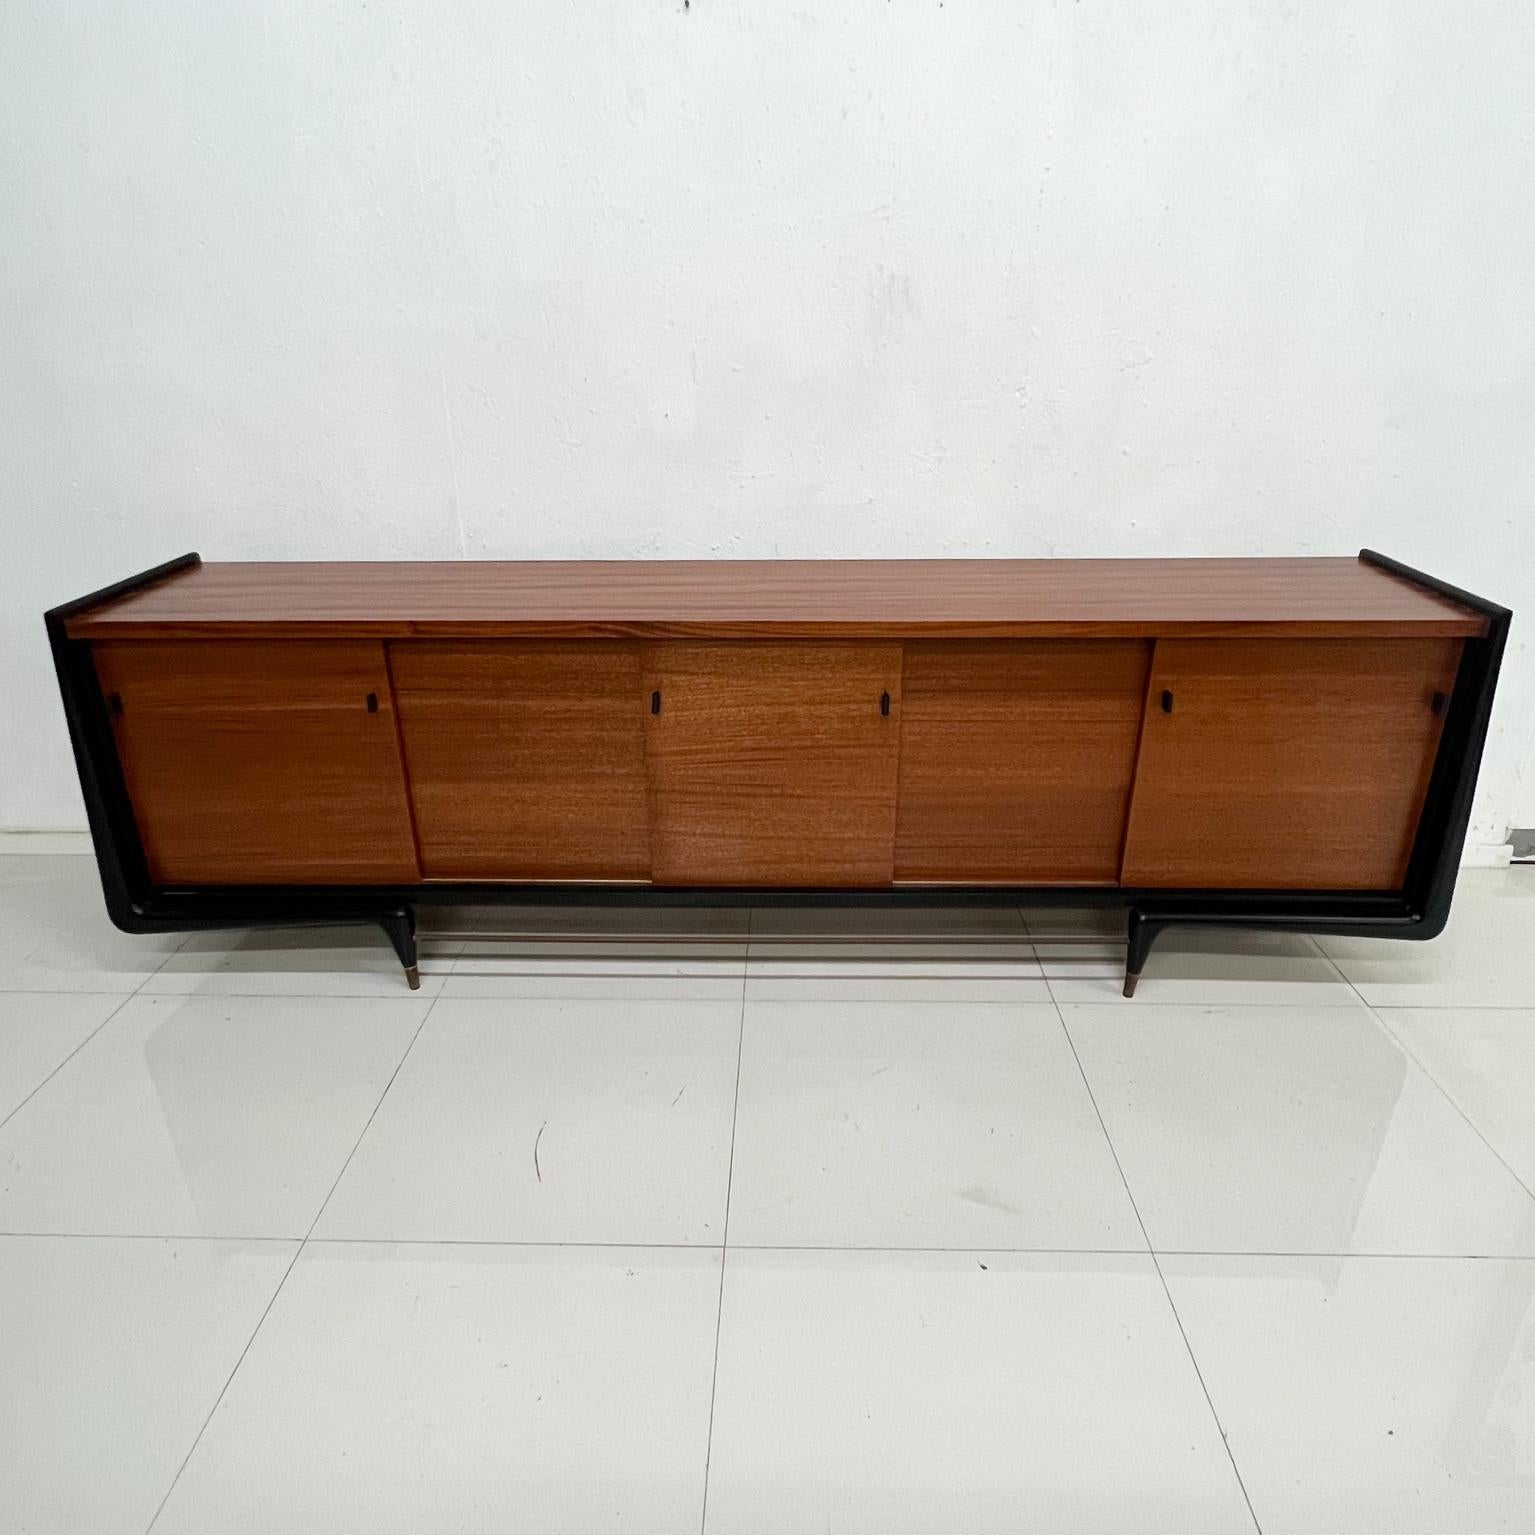 Dramatic Mexican Modernism 1950s custom credenza sideboard showpiece
Mahogany ebonized wood leather and brass accents.
Unmarked, attributed style of Eugenio Escudero Mexico City.
Approximately 100.5 wide x 19.5 deep x 30.75 tall 
Top is 30 -